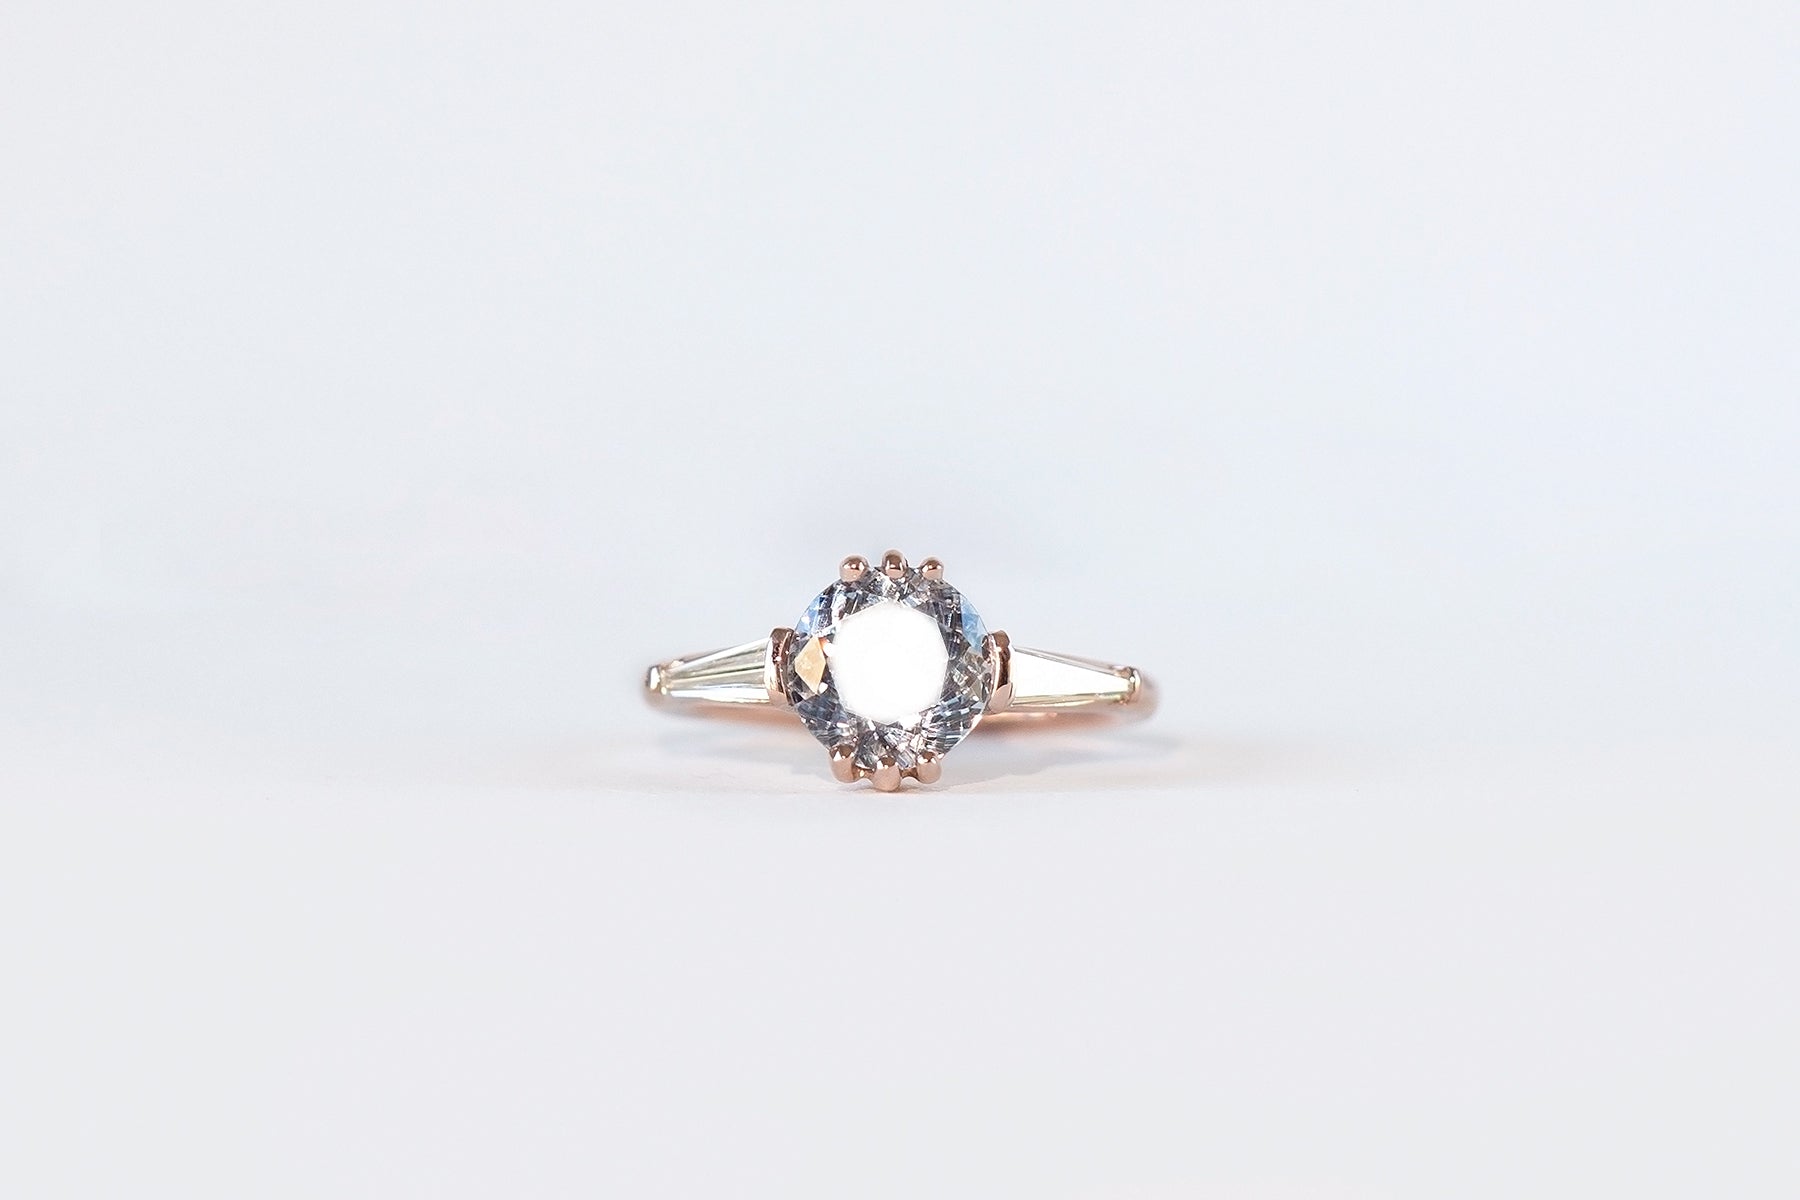 Glowing Greyish Lavender Montana Sapphire Lilith Ring - S. Kind & Co